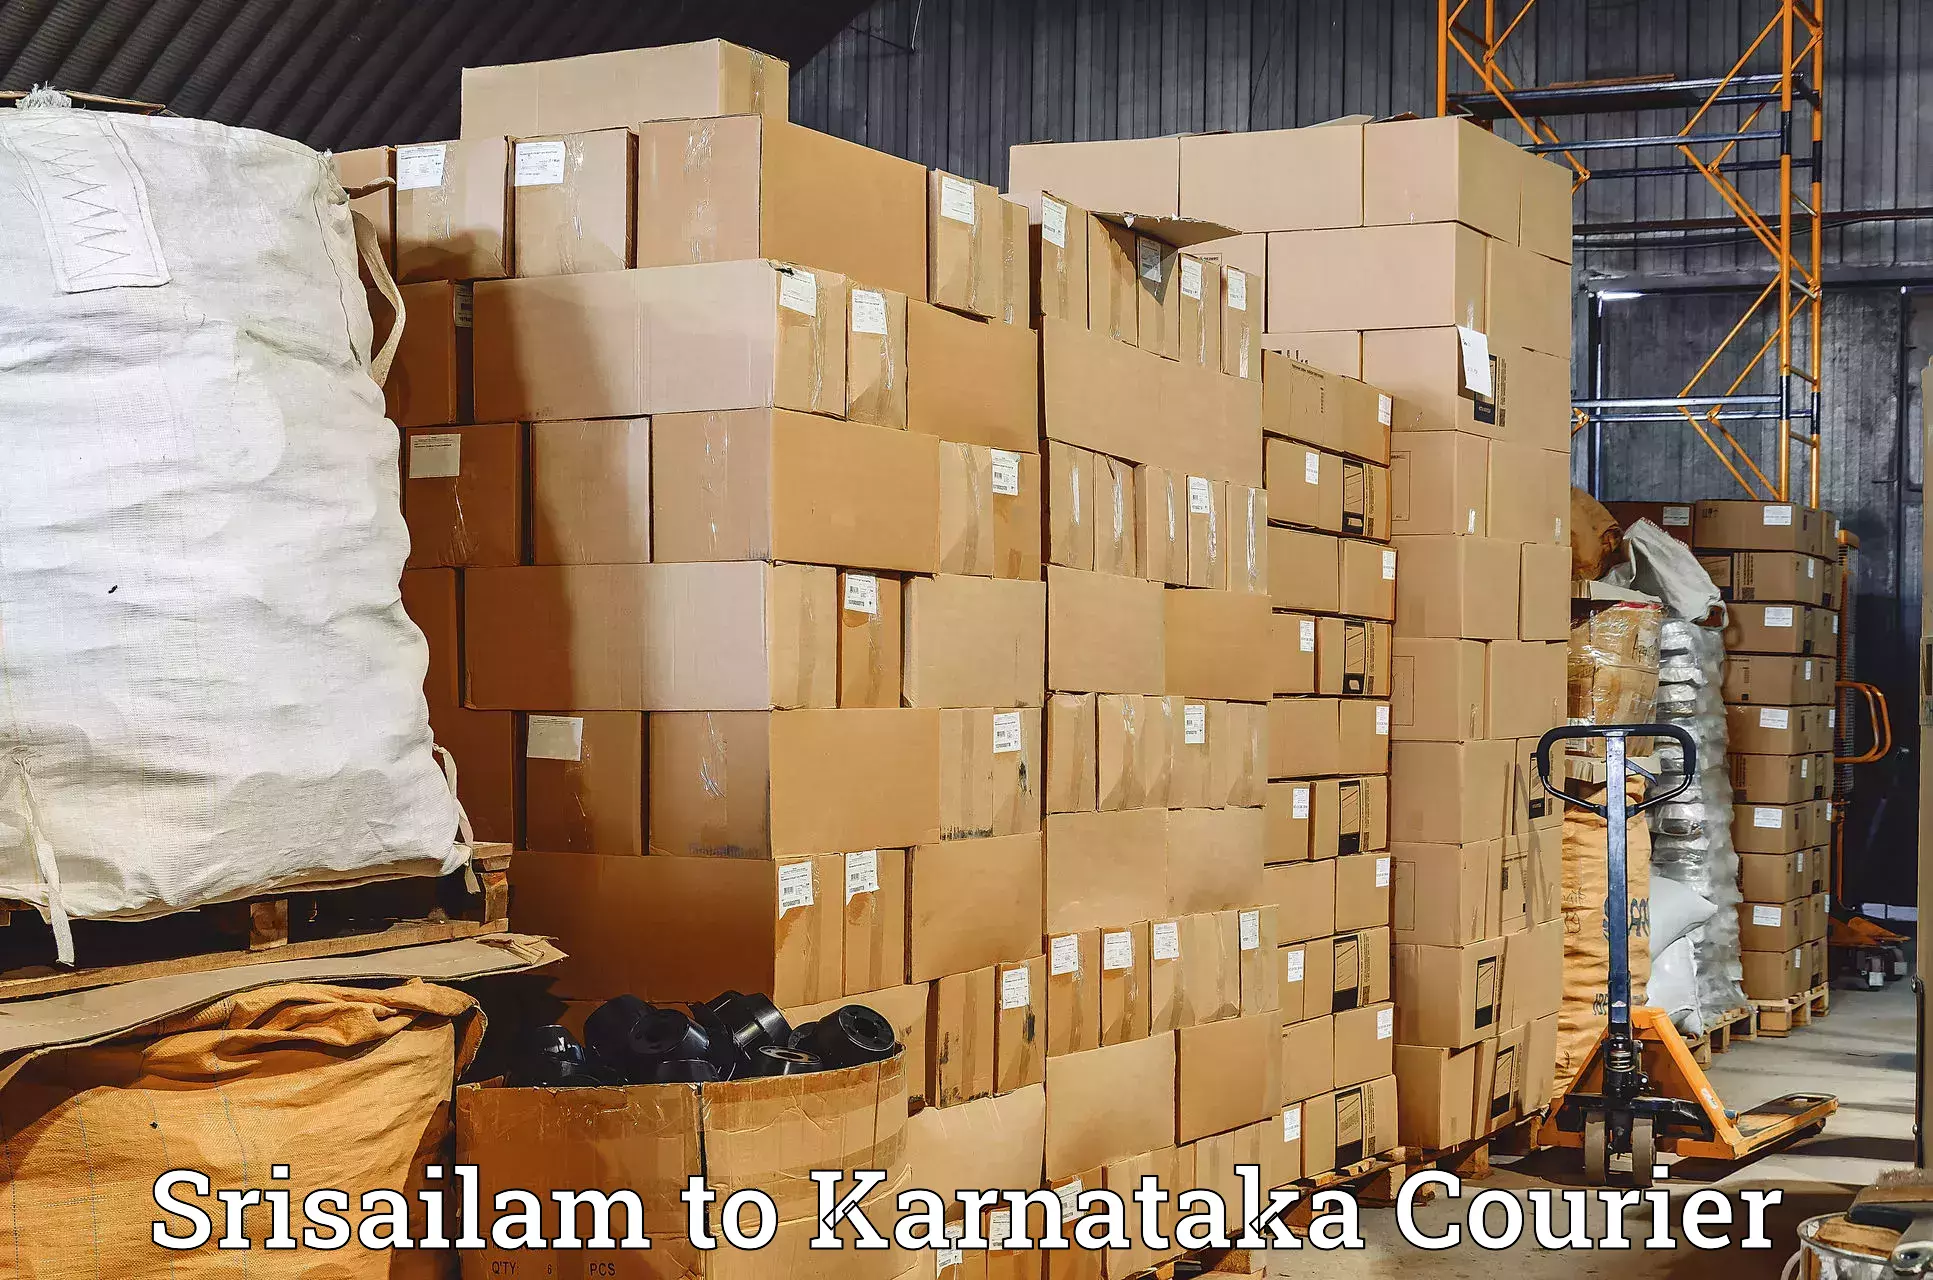 Global shipping networks Srisailam to Puttur